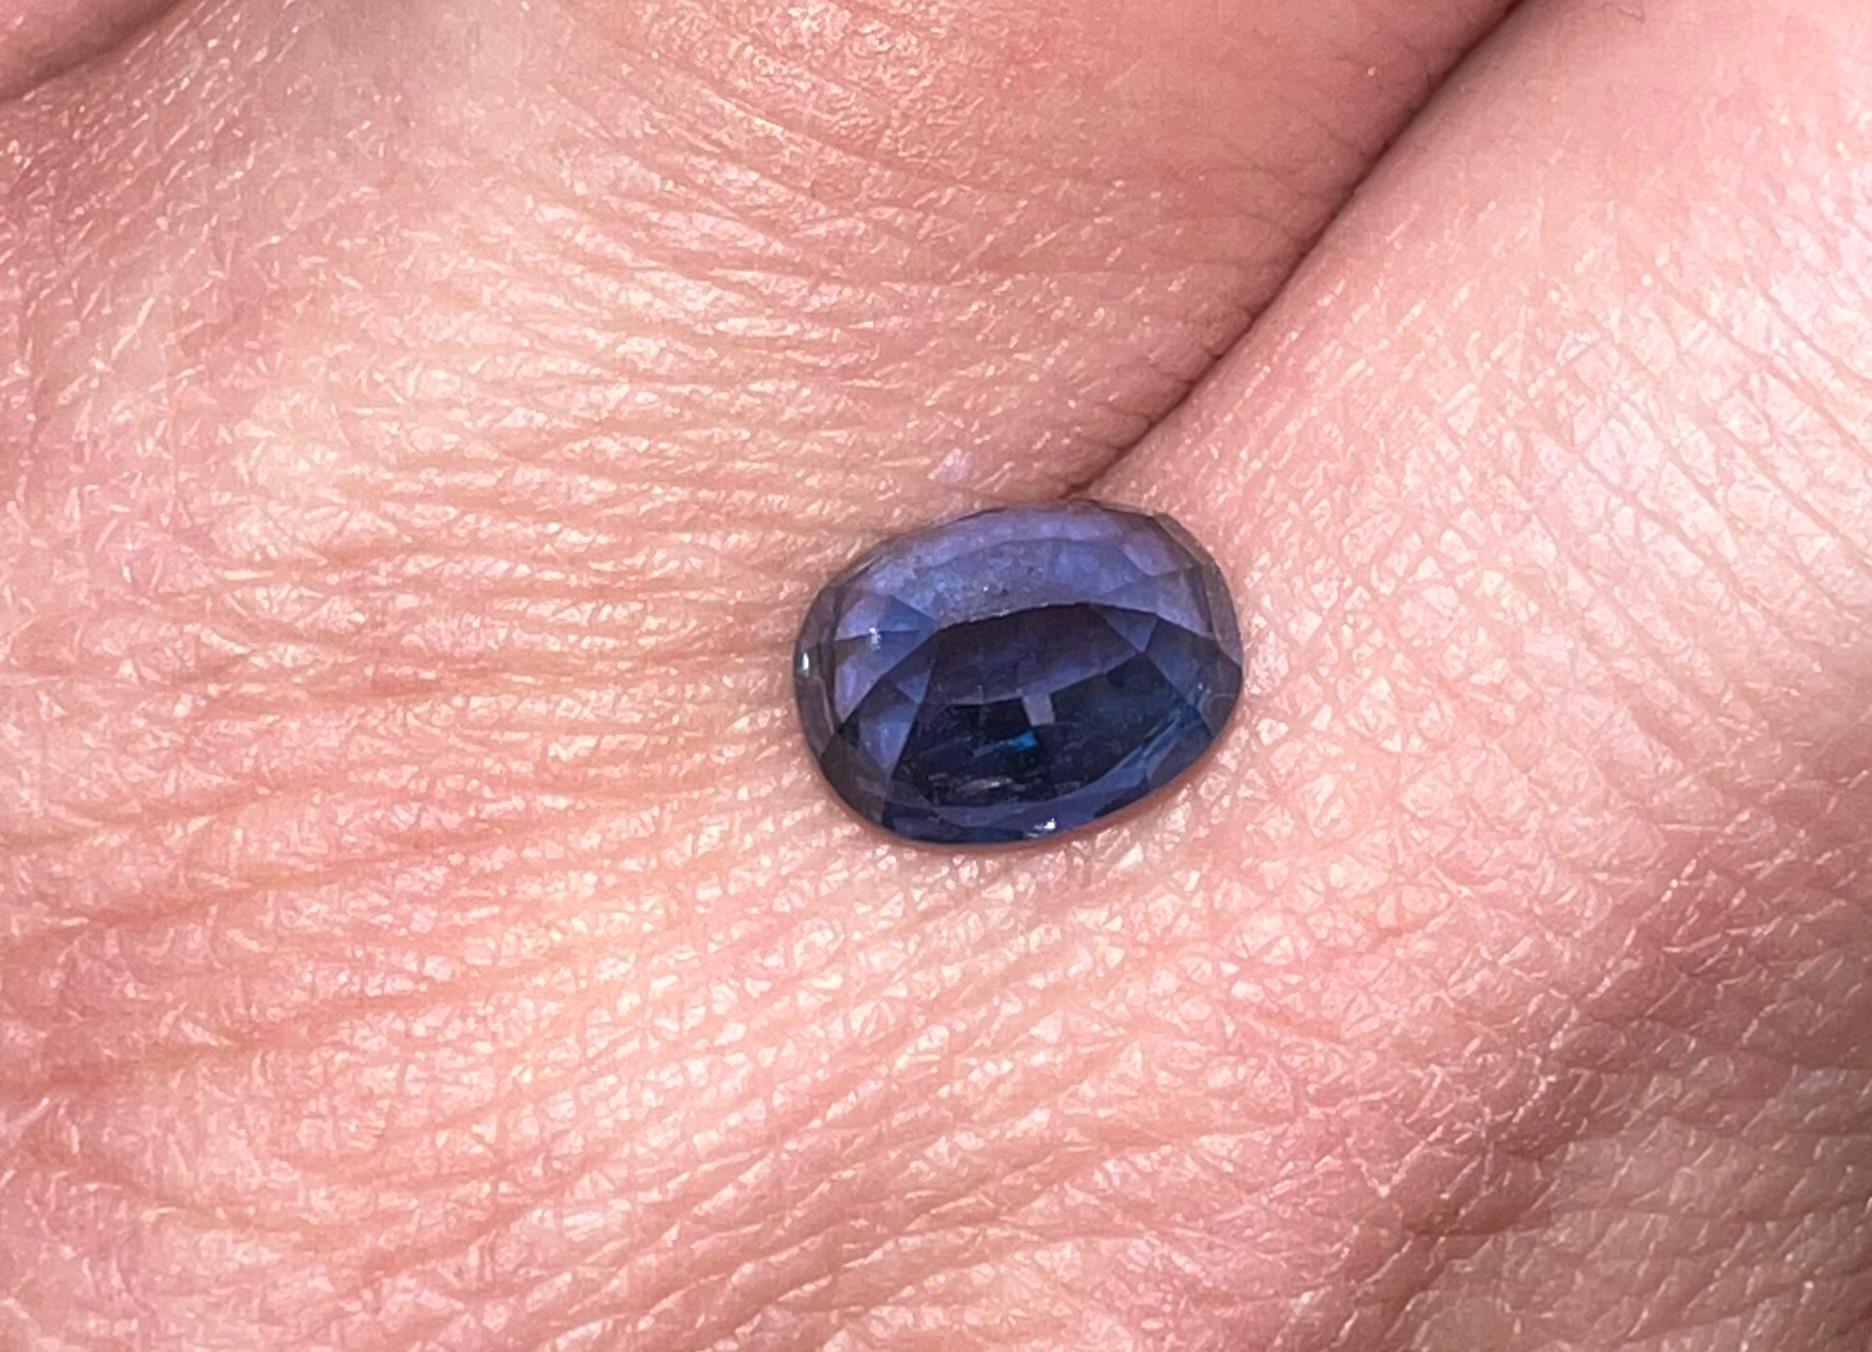 Extremely Rare 2.11 carat Cobalt Spinel 1